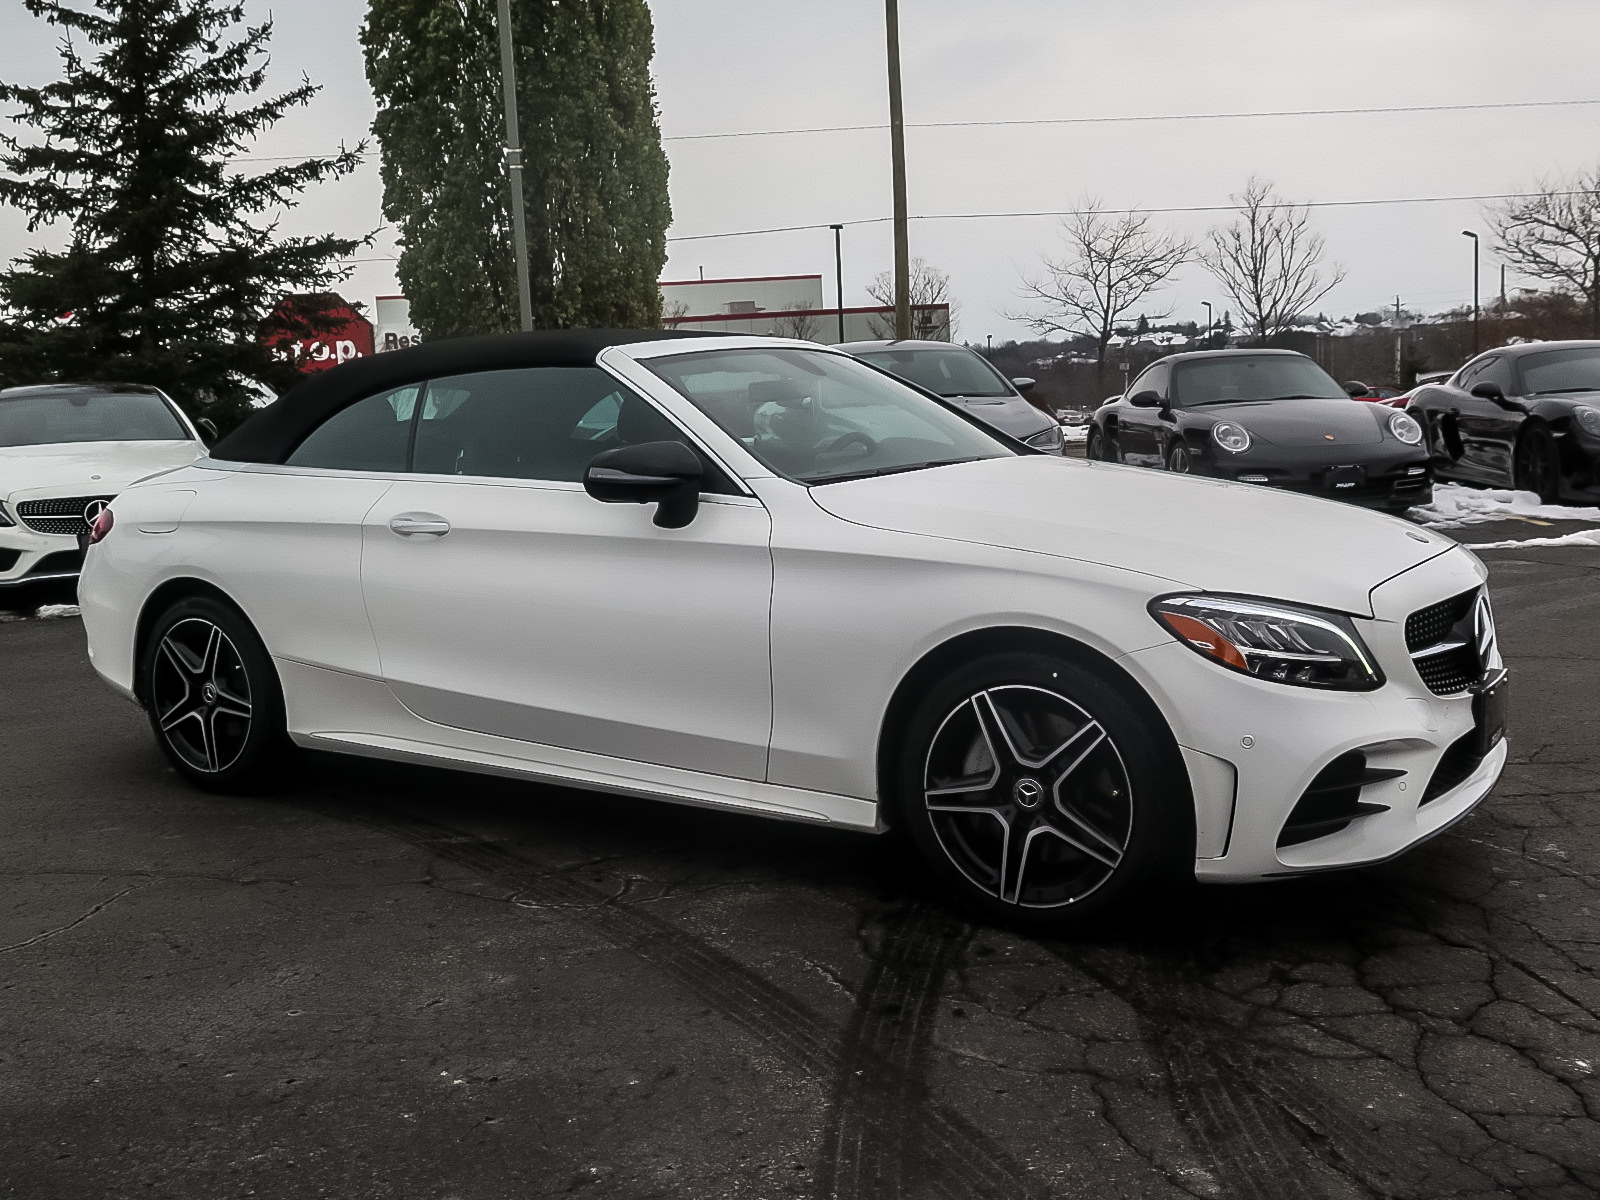 New 2020 MercedesBenz C300 4MATIC Cabriolet Convertible in Kitchener